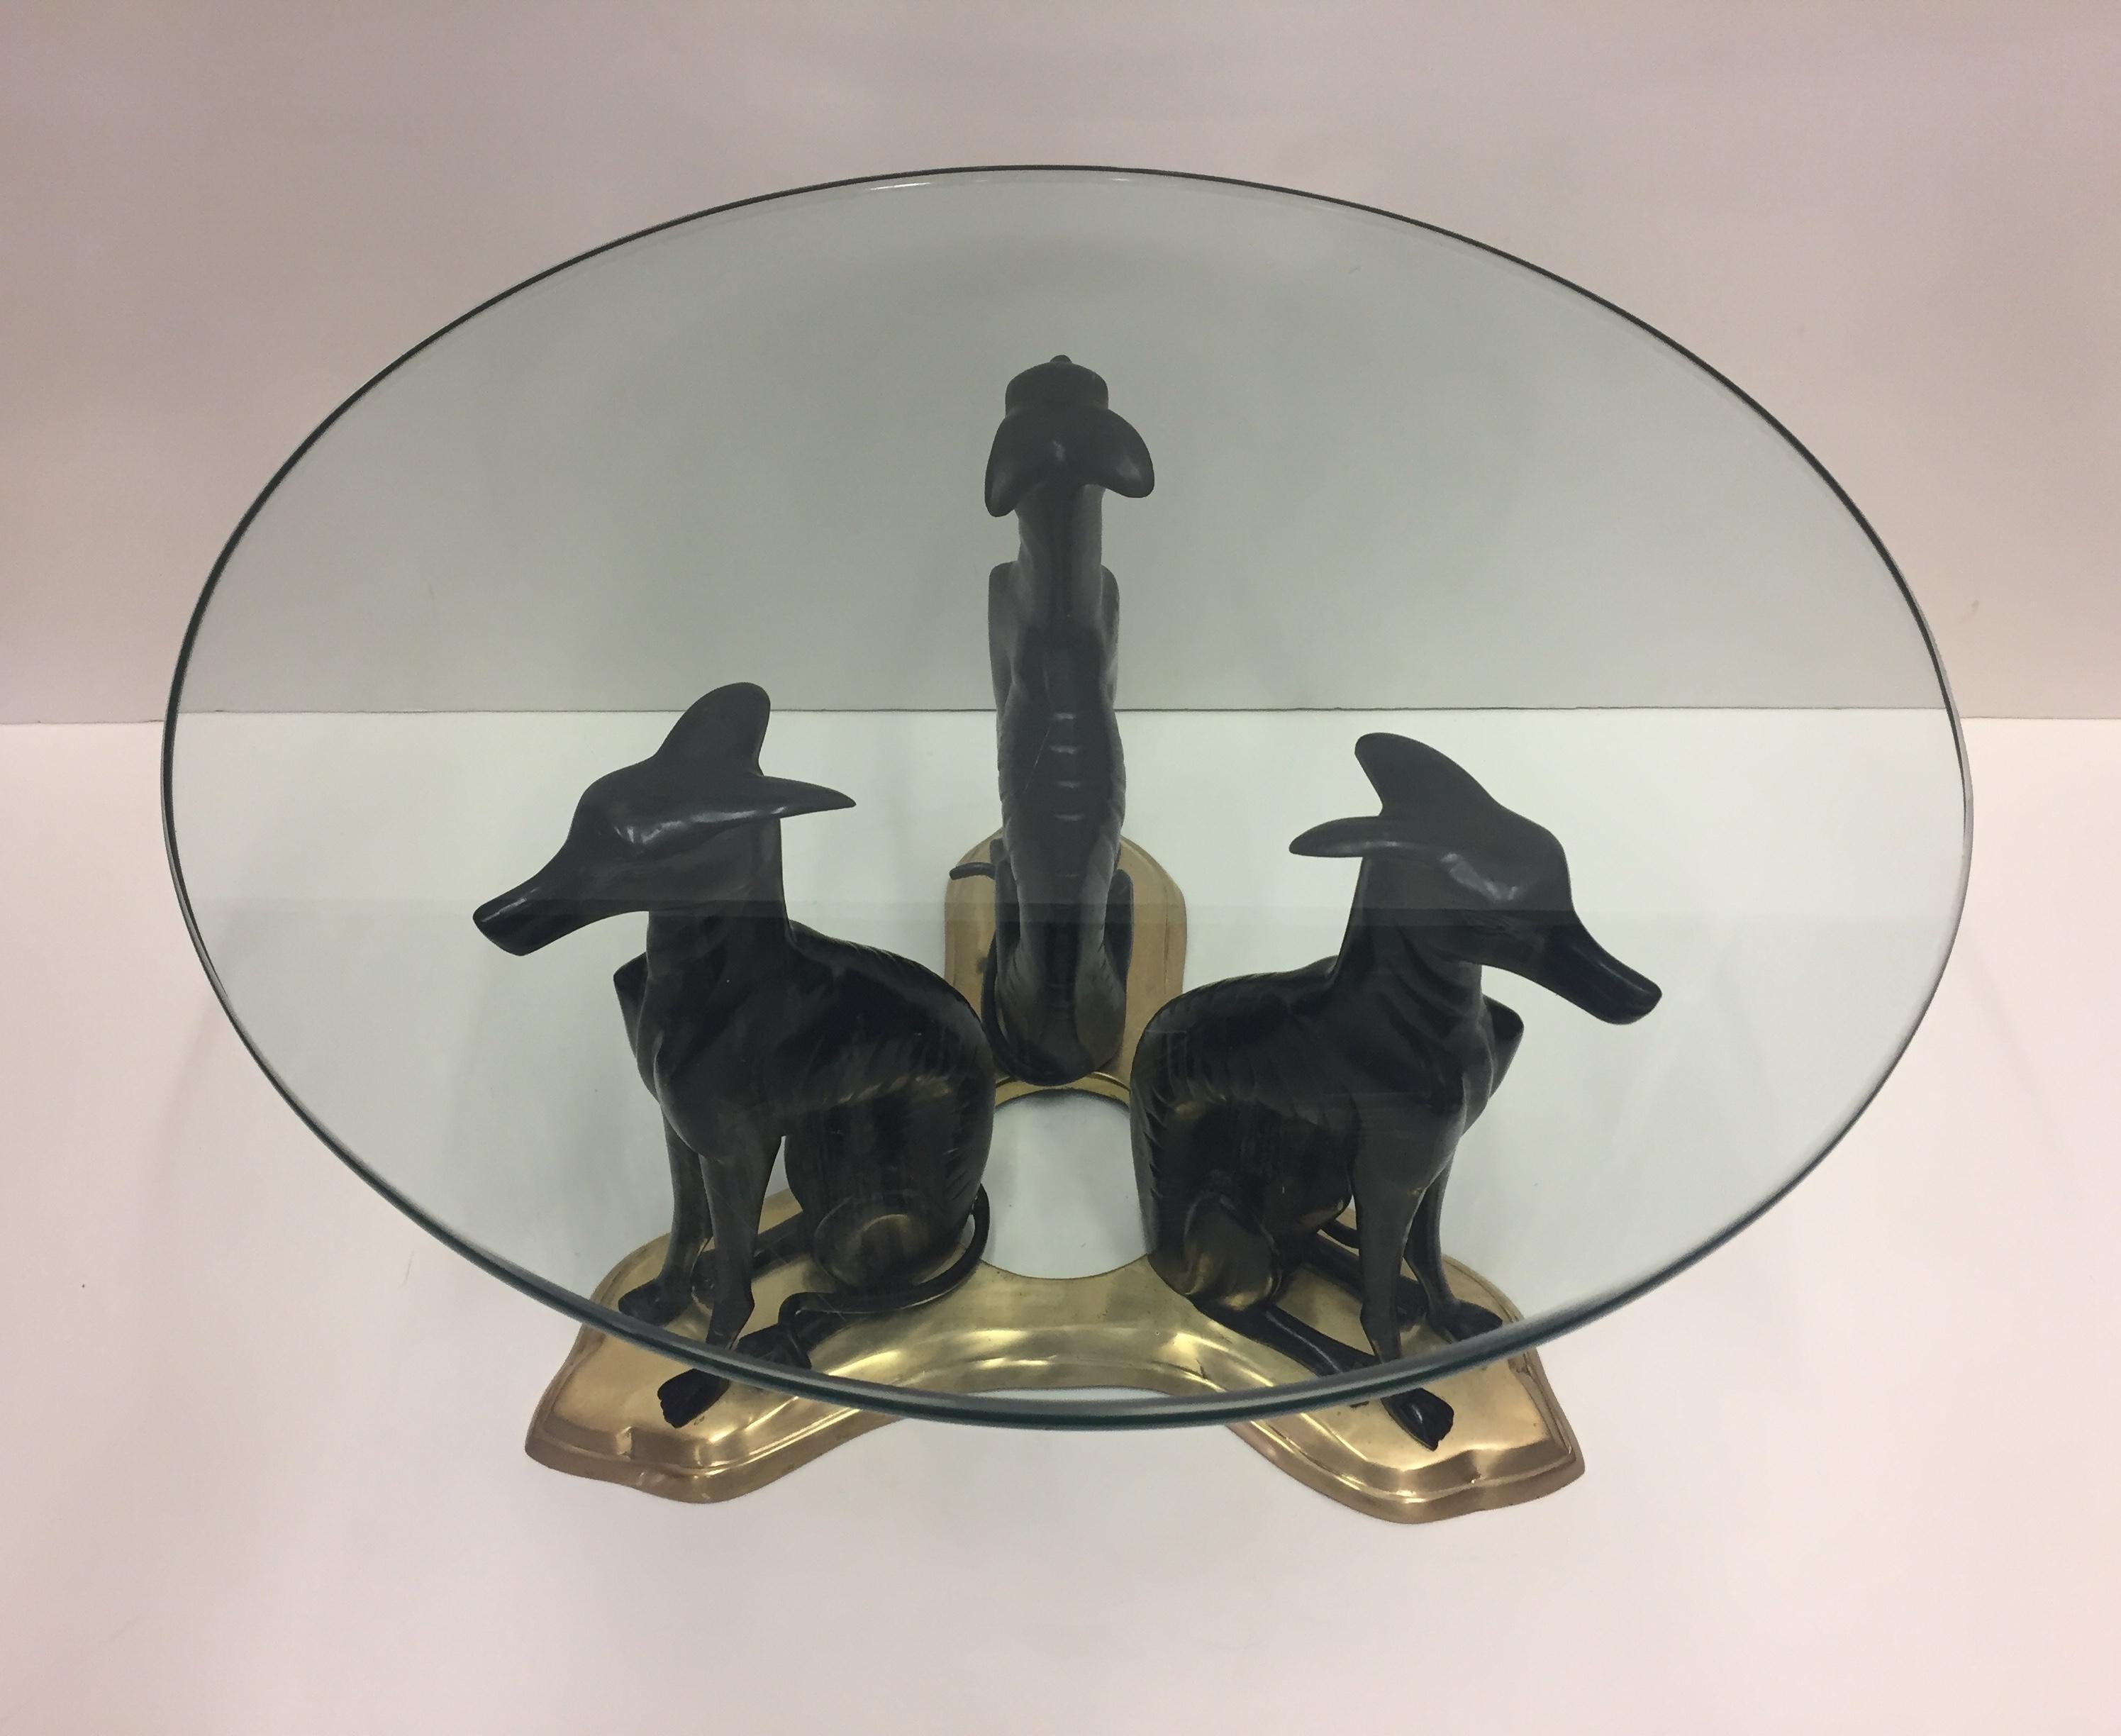 Dramatic round coffee table having an amazing base of 3 patinated bronze whippet dogs seated on bronze platform. Chunky thick glass top.